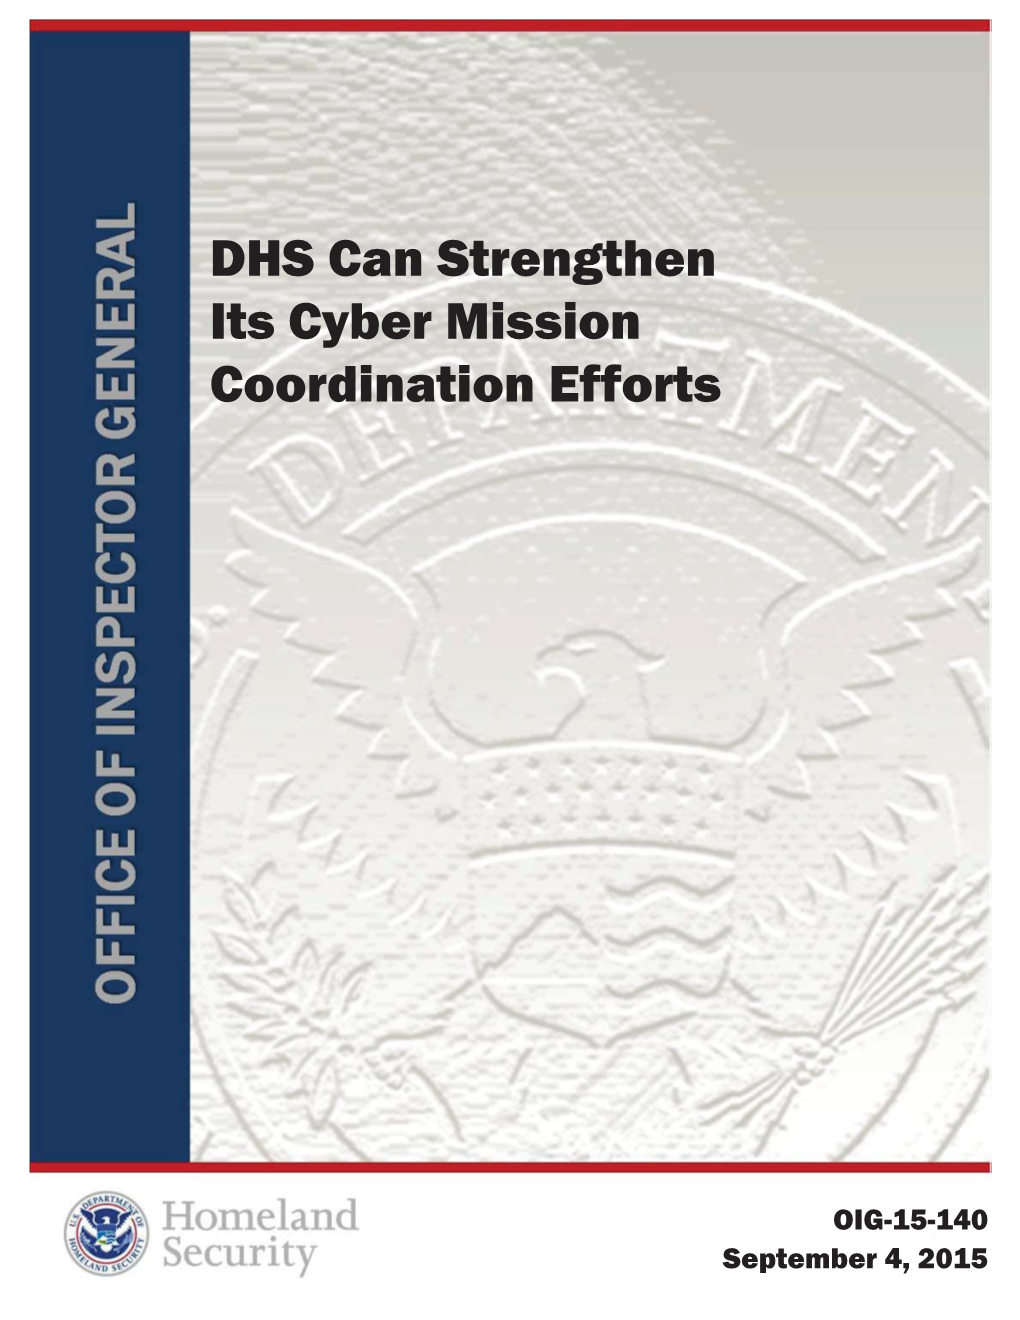 OIG-15-140 September 4, 2015 DHS OIG HIGHLIGHTS DHS Can Strengthen Its Cyber Mission Coordination Efforts